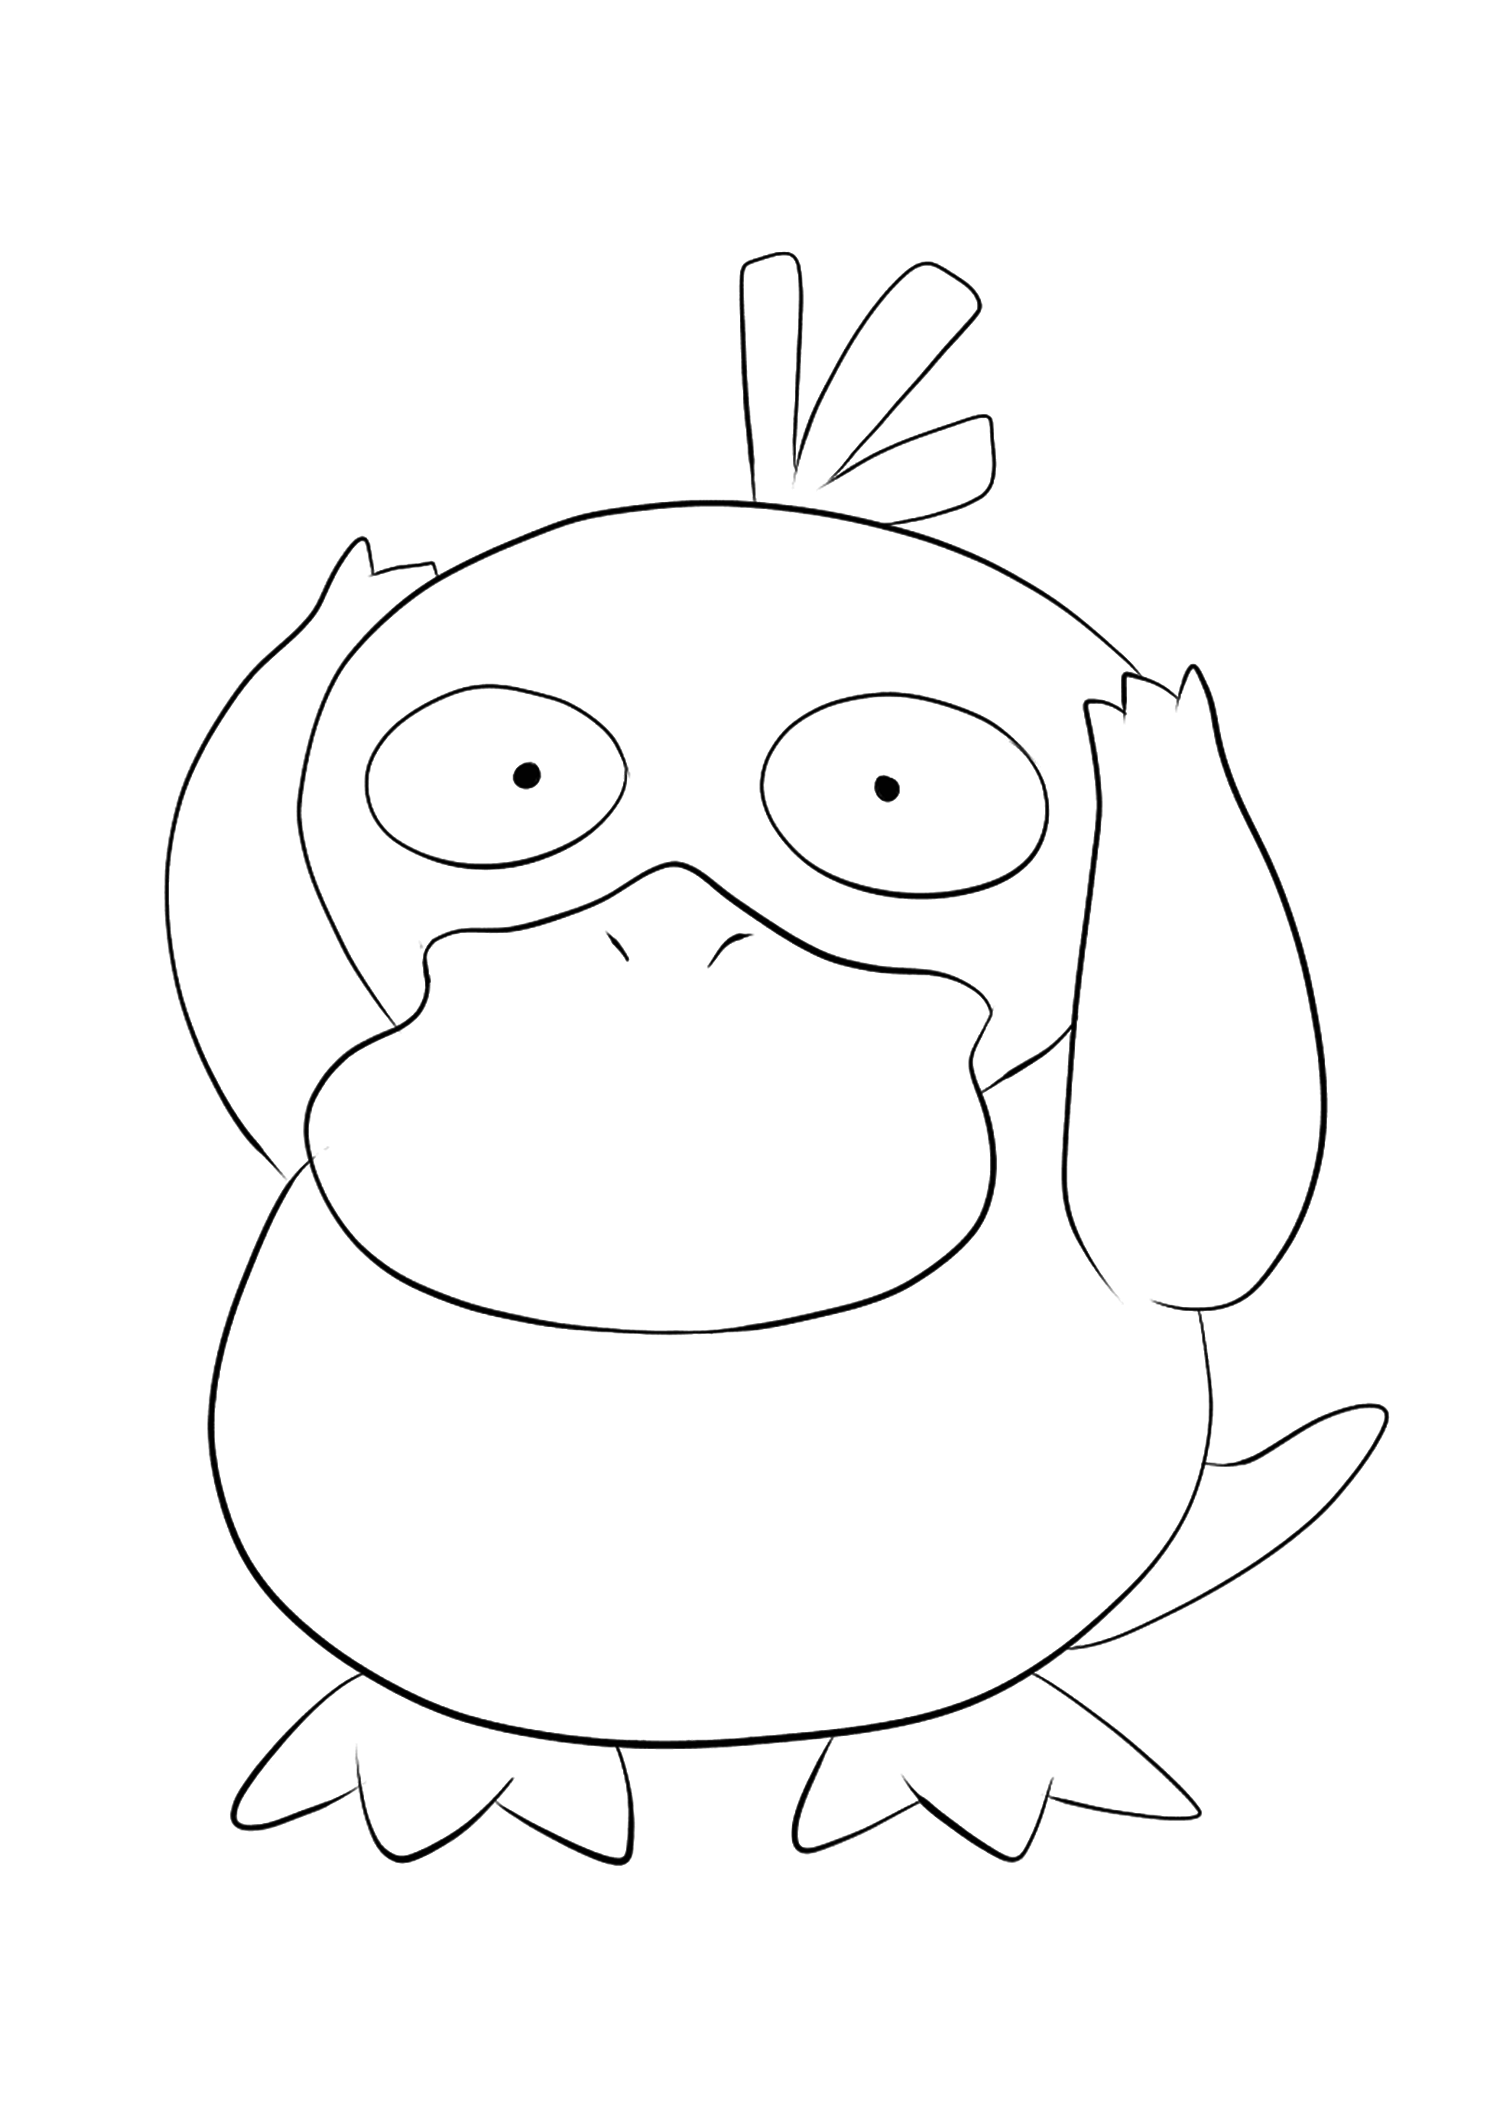 Download Psyduck Coloring Pages - Coloring Home